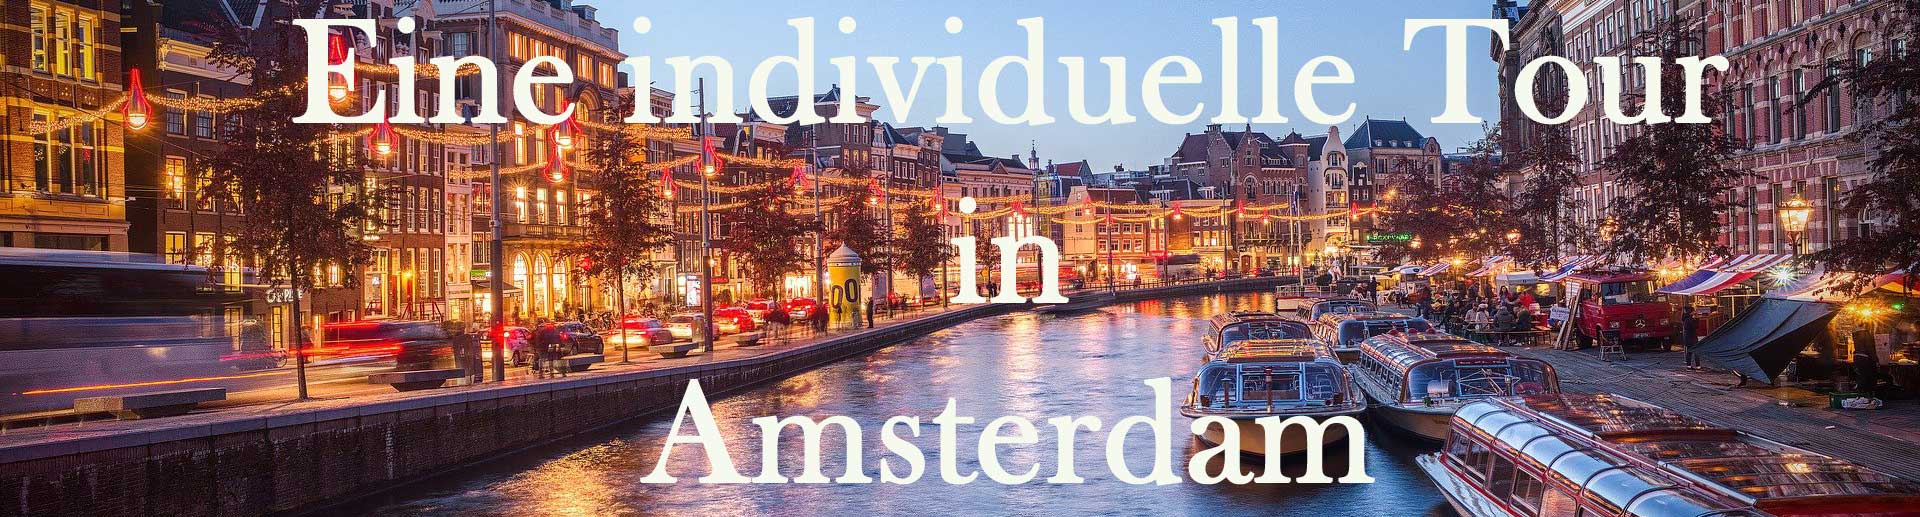 individuelle tour amsterdam